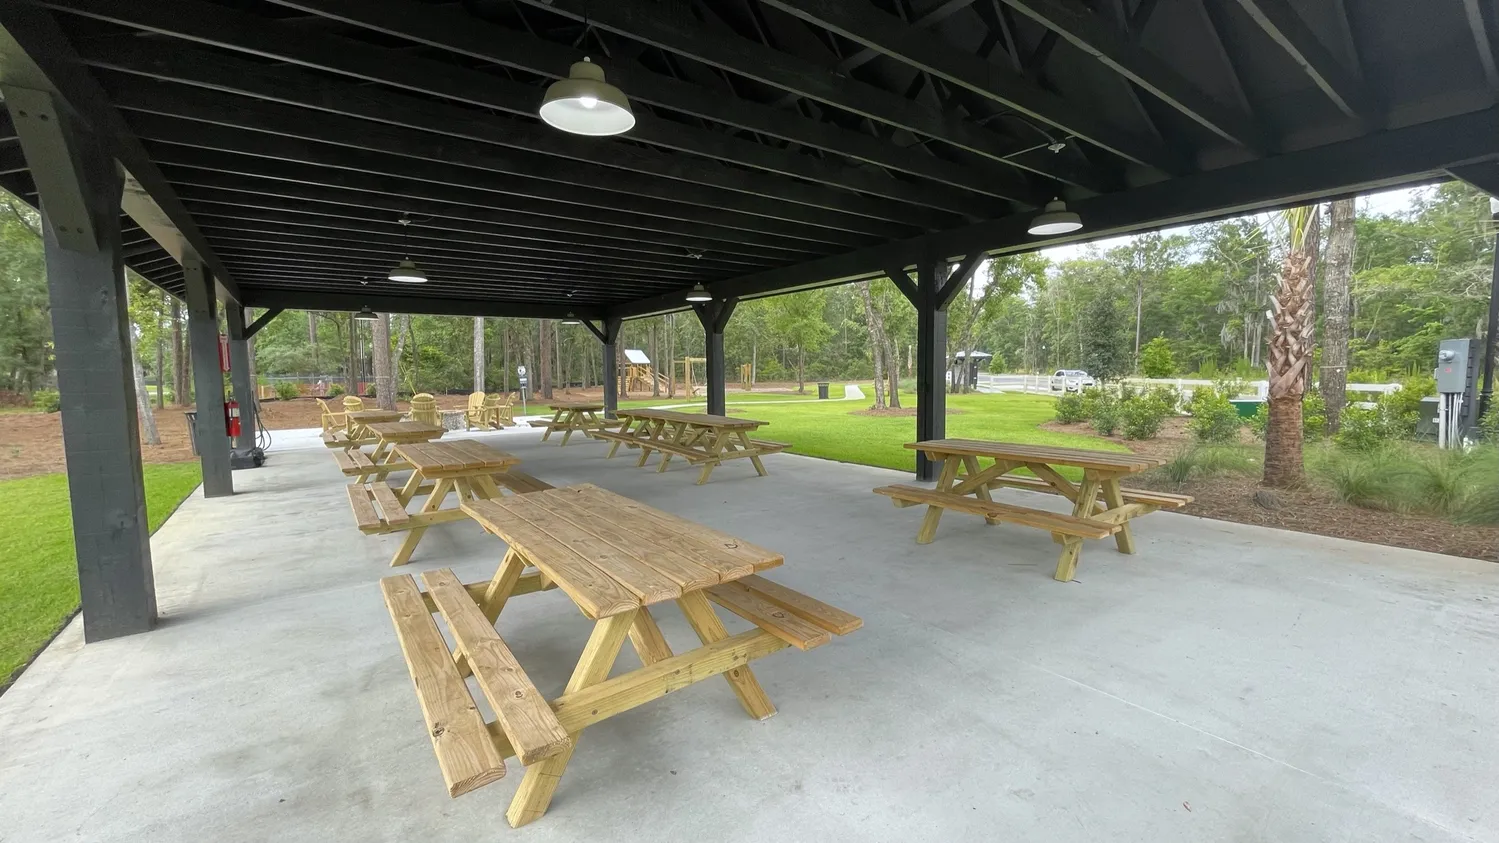 Community Pavilion with Picnic Tables and Grills